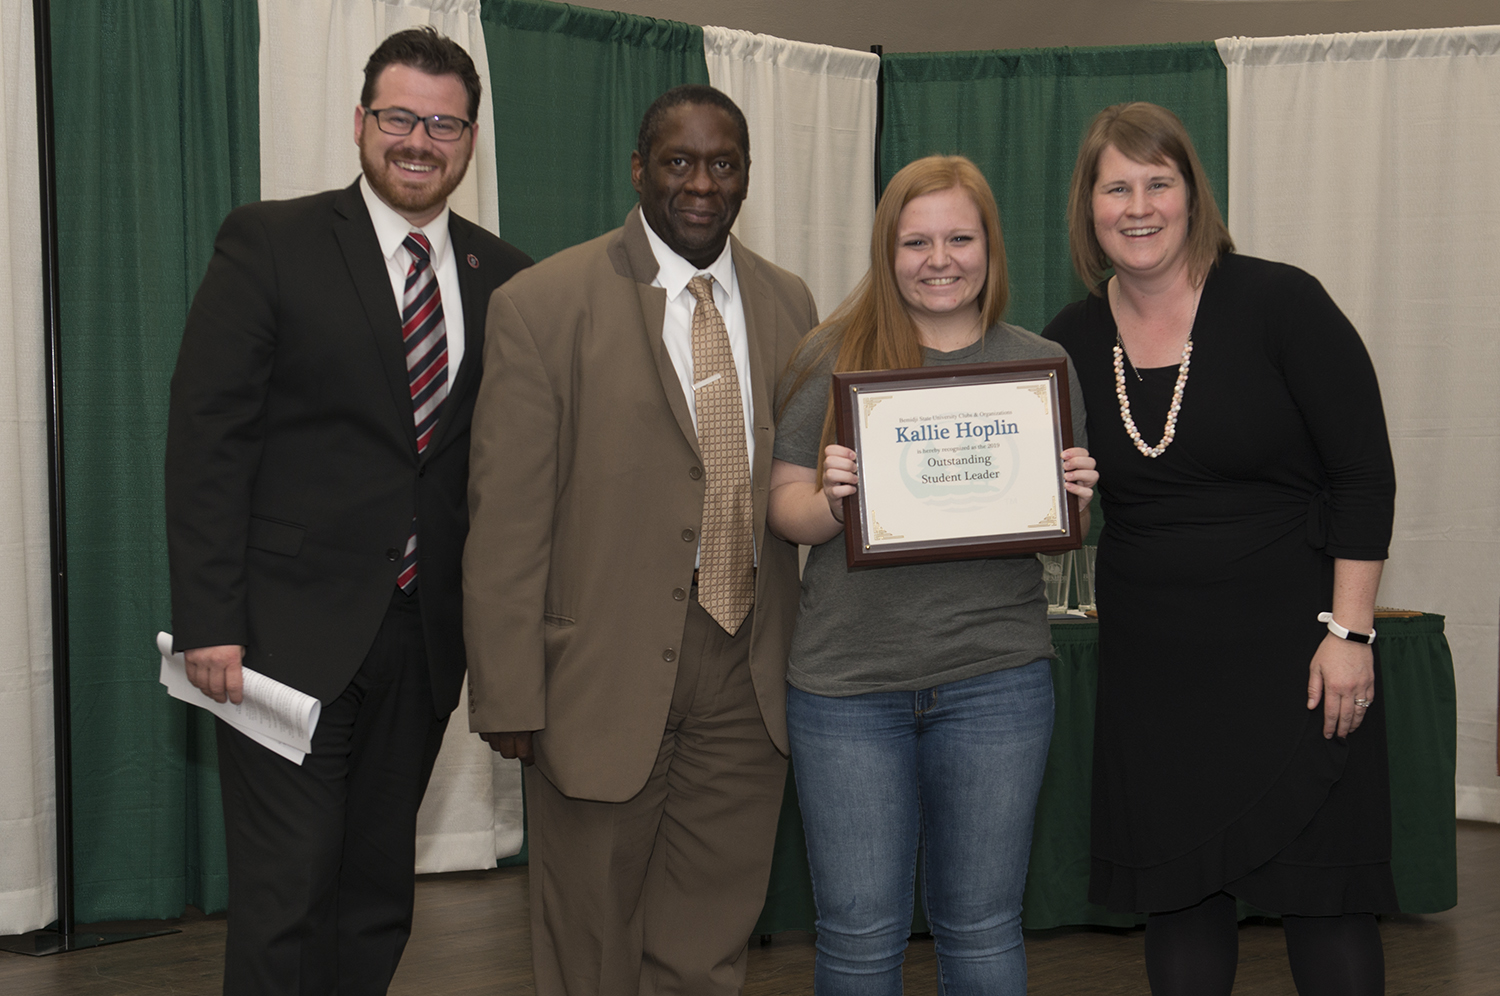 Kallie Hoplin received this year's Outstanding Student Leader Award.